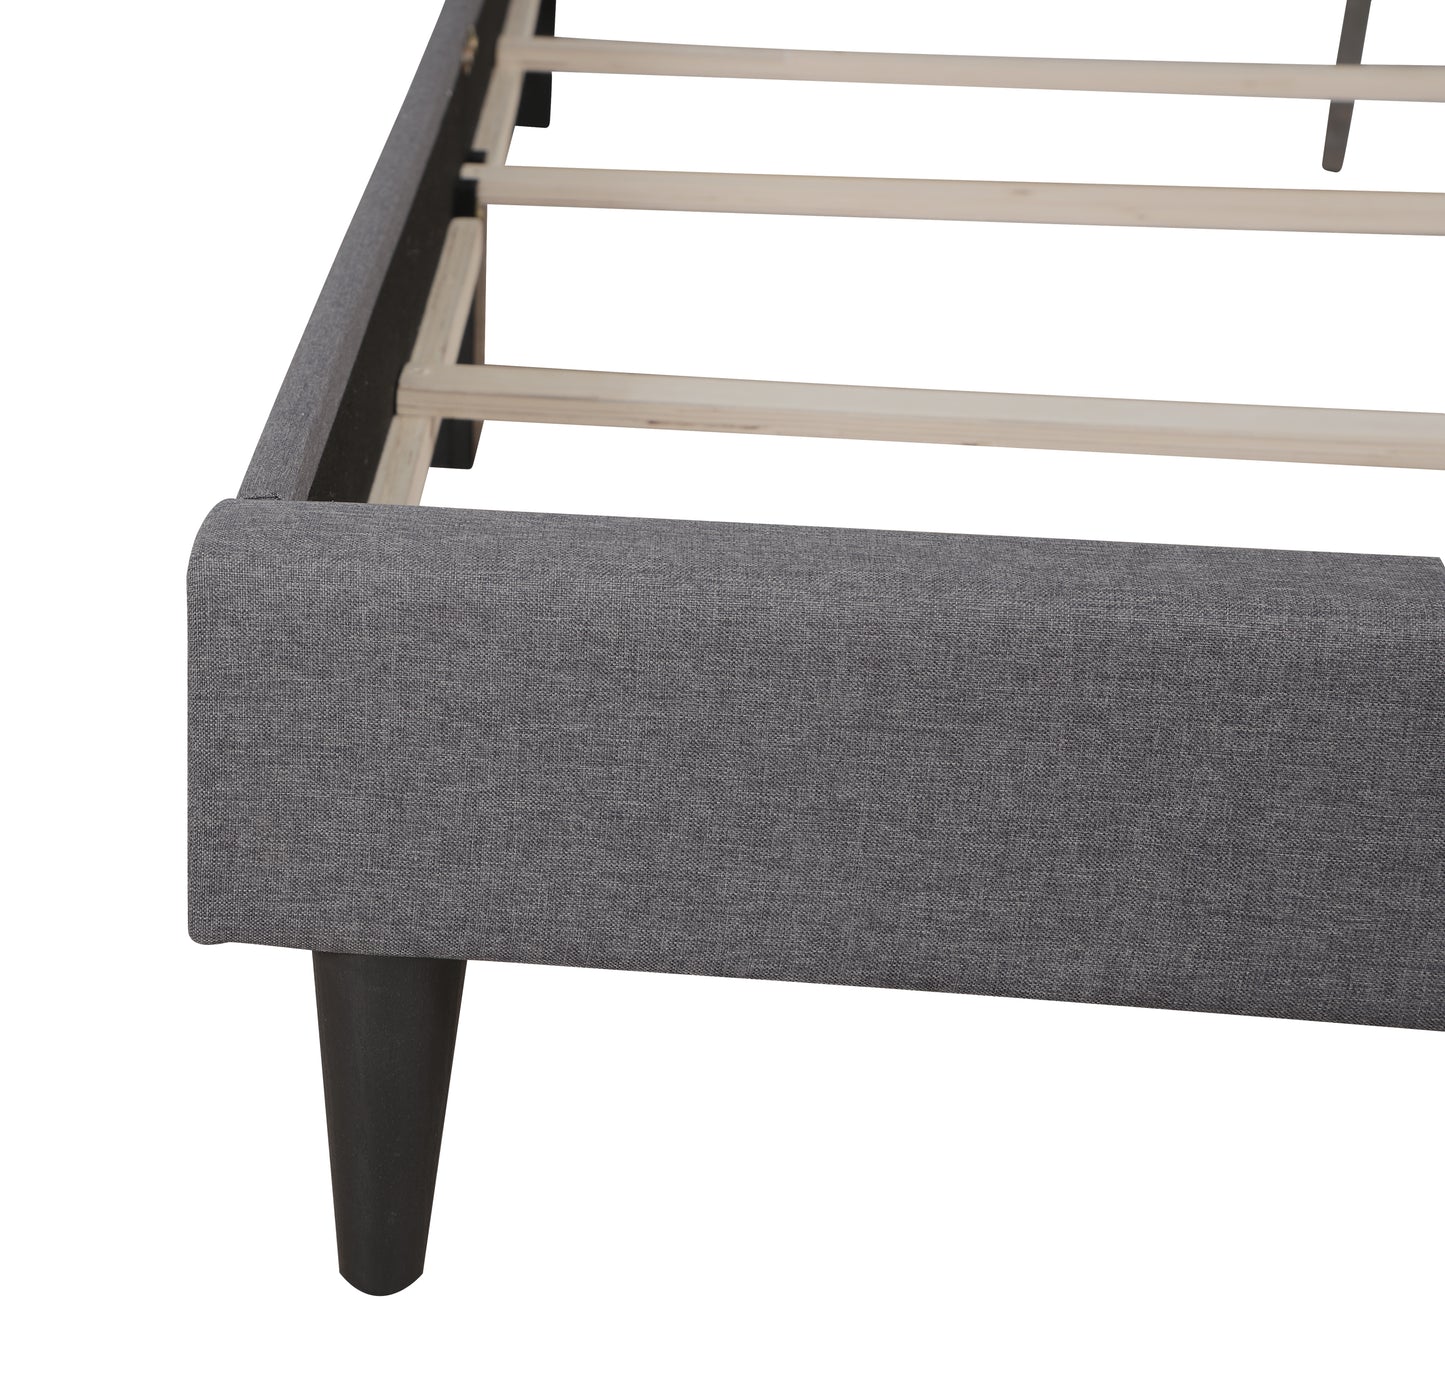 Deb G1104-QB-UP Queen Bed - All In One Box , GRAY